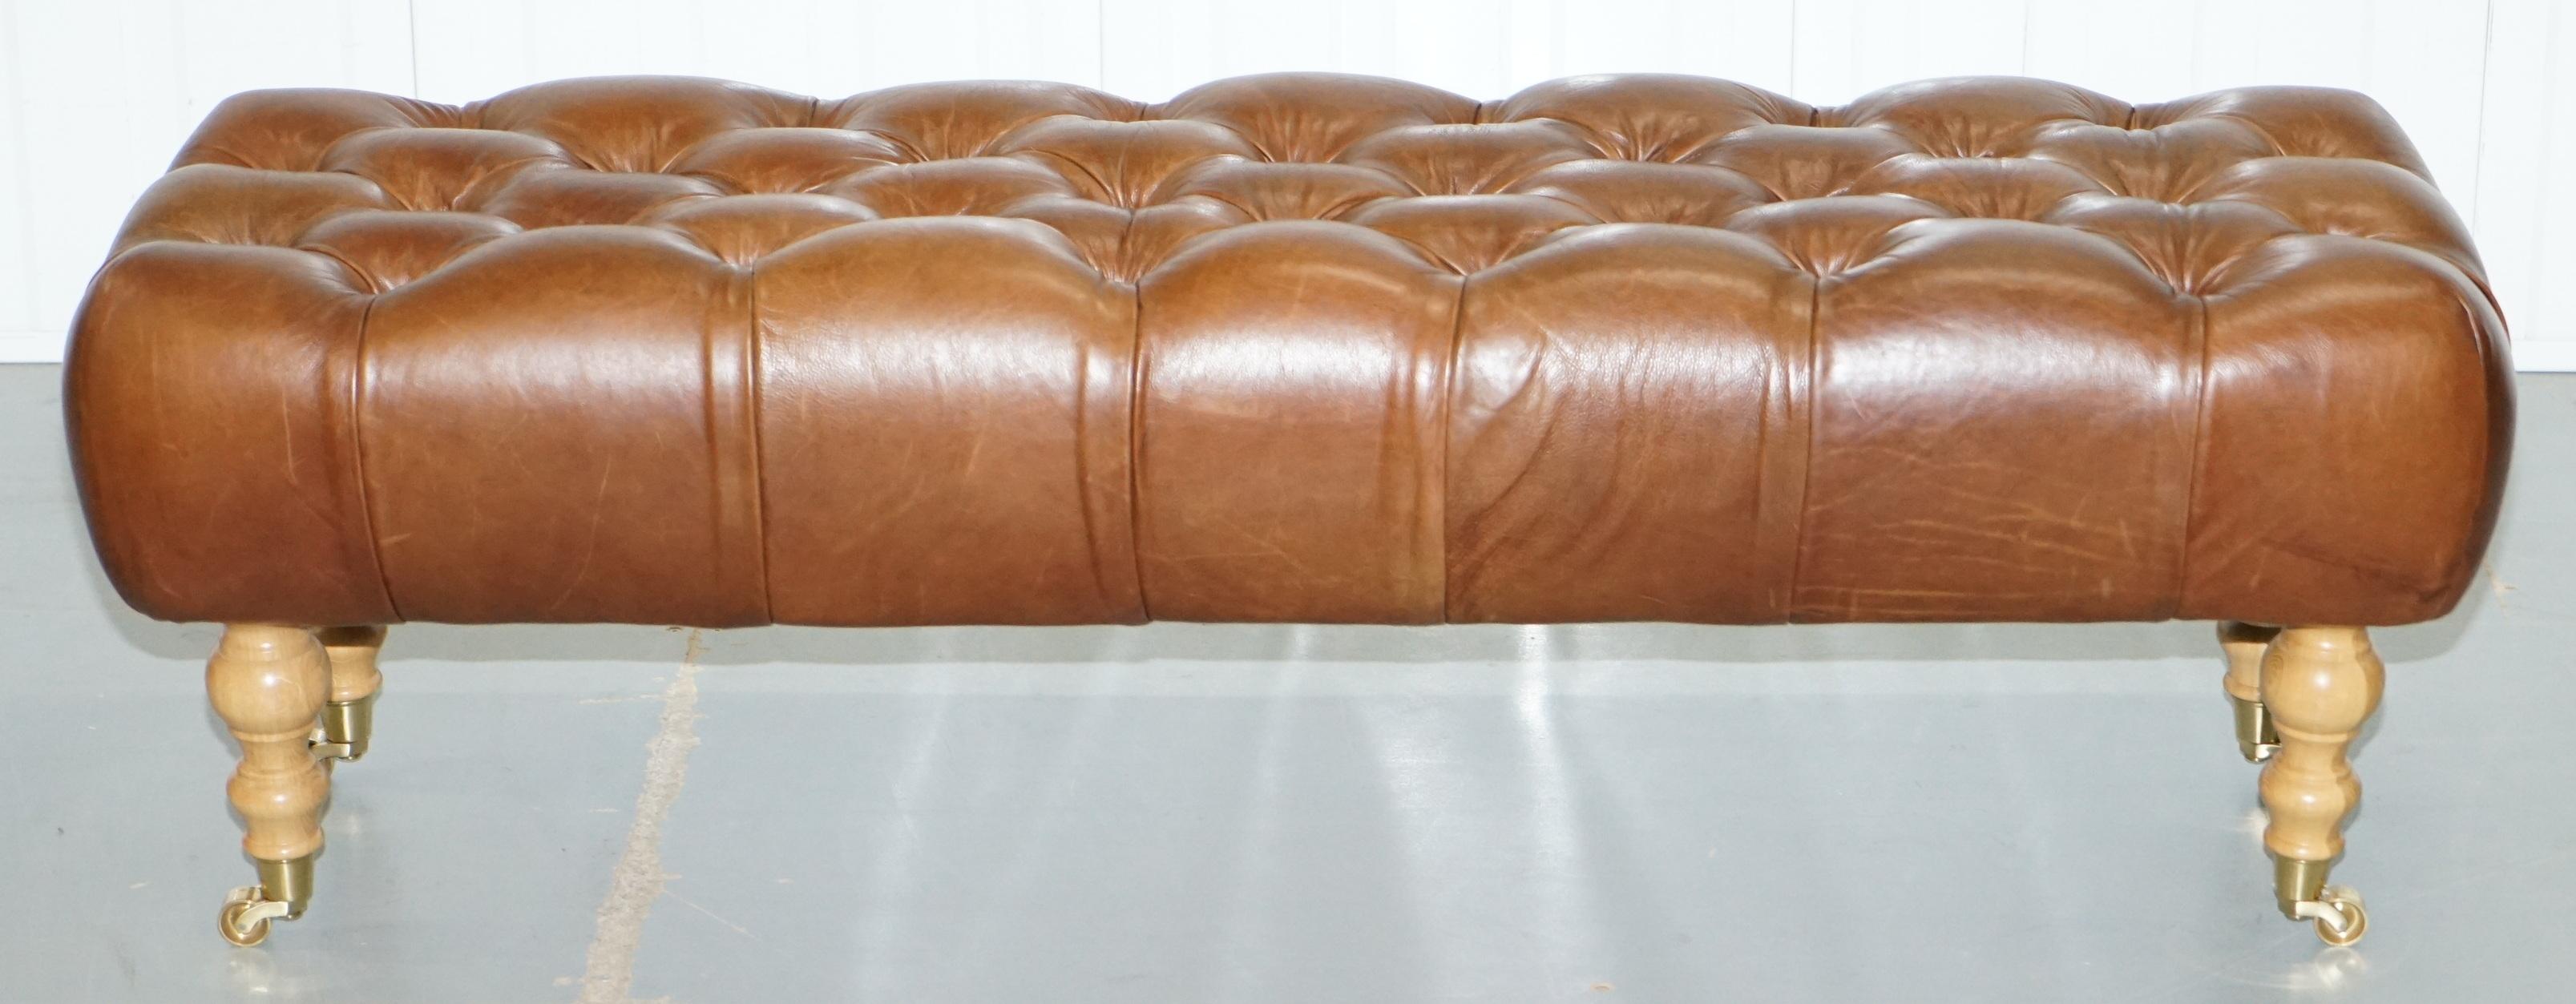 We are delighted to offer for sale this very nice oversized three-person Chesterfield Chestnut brown leather footstool

A good looking and well-made piece, the frame is beech and other hardwoods, the leather upholstery is Scottish fully aniline